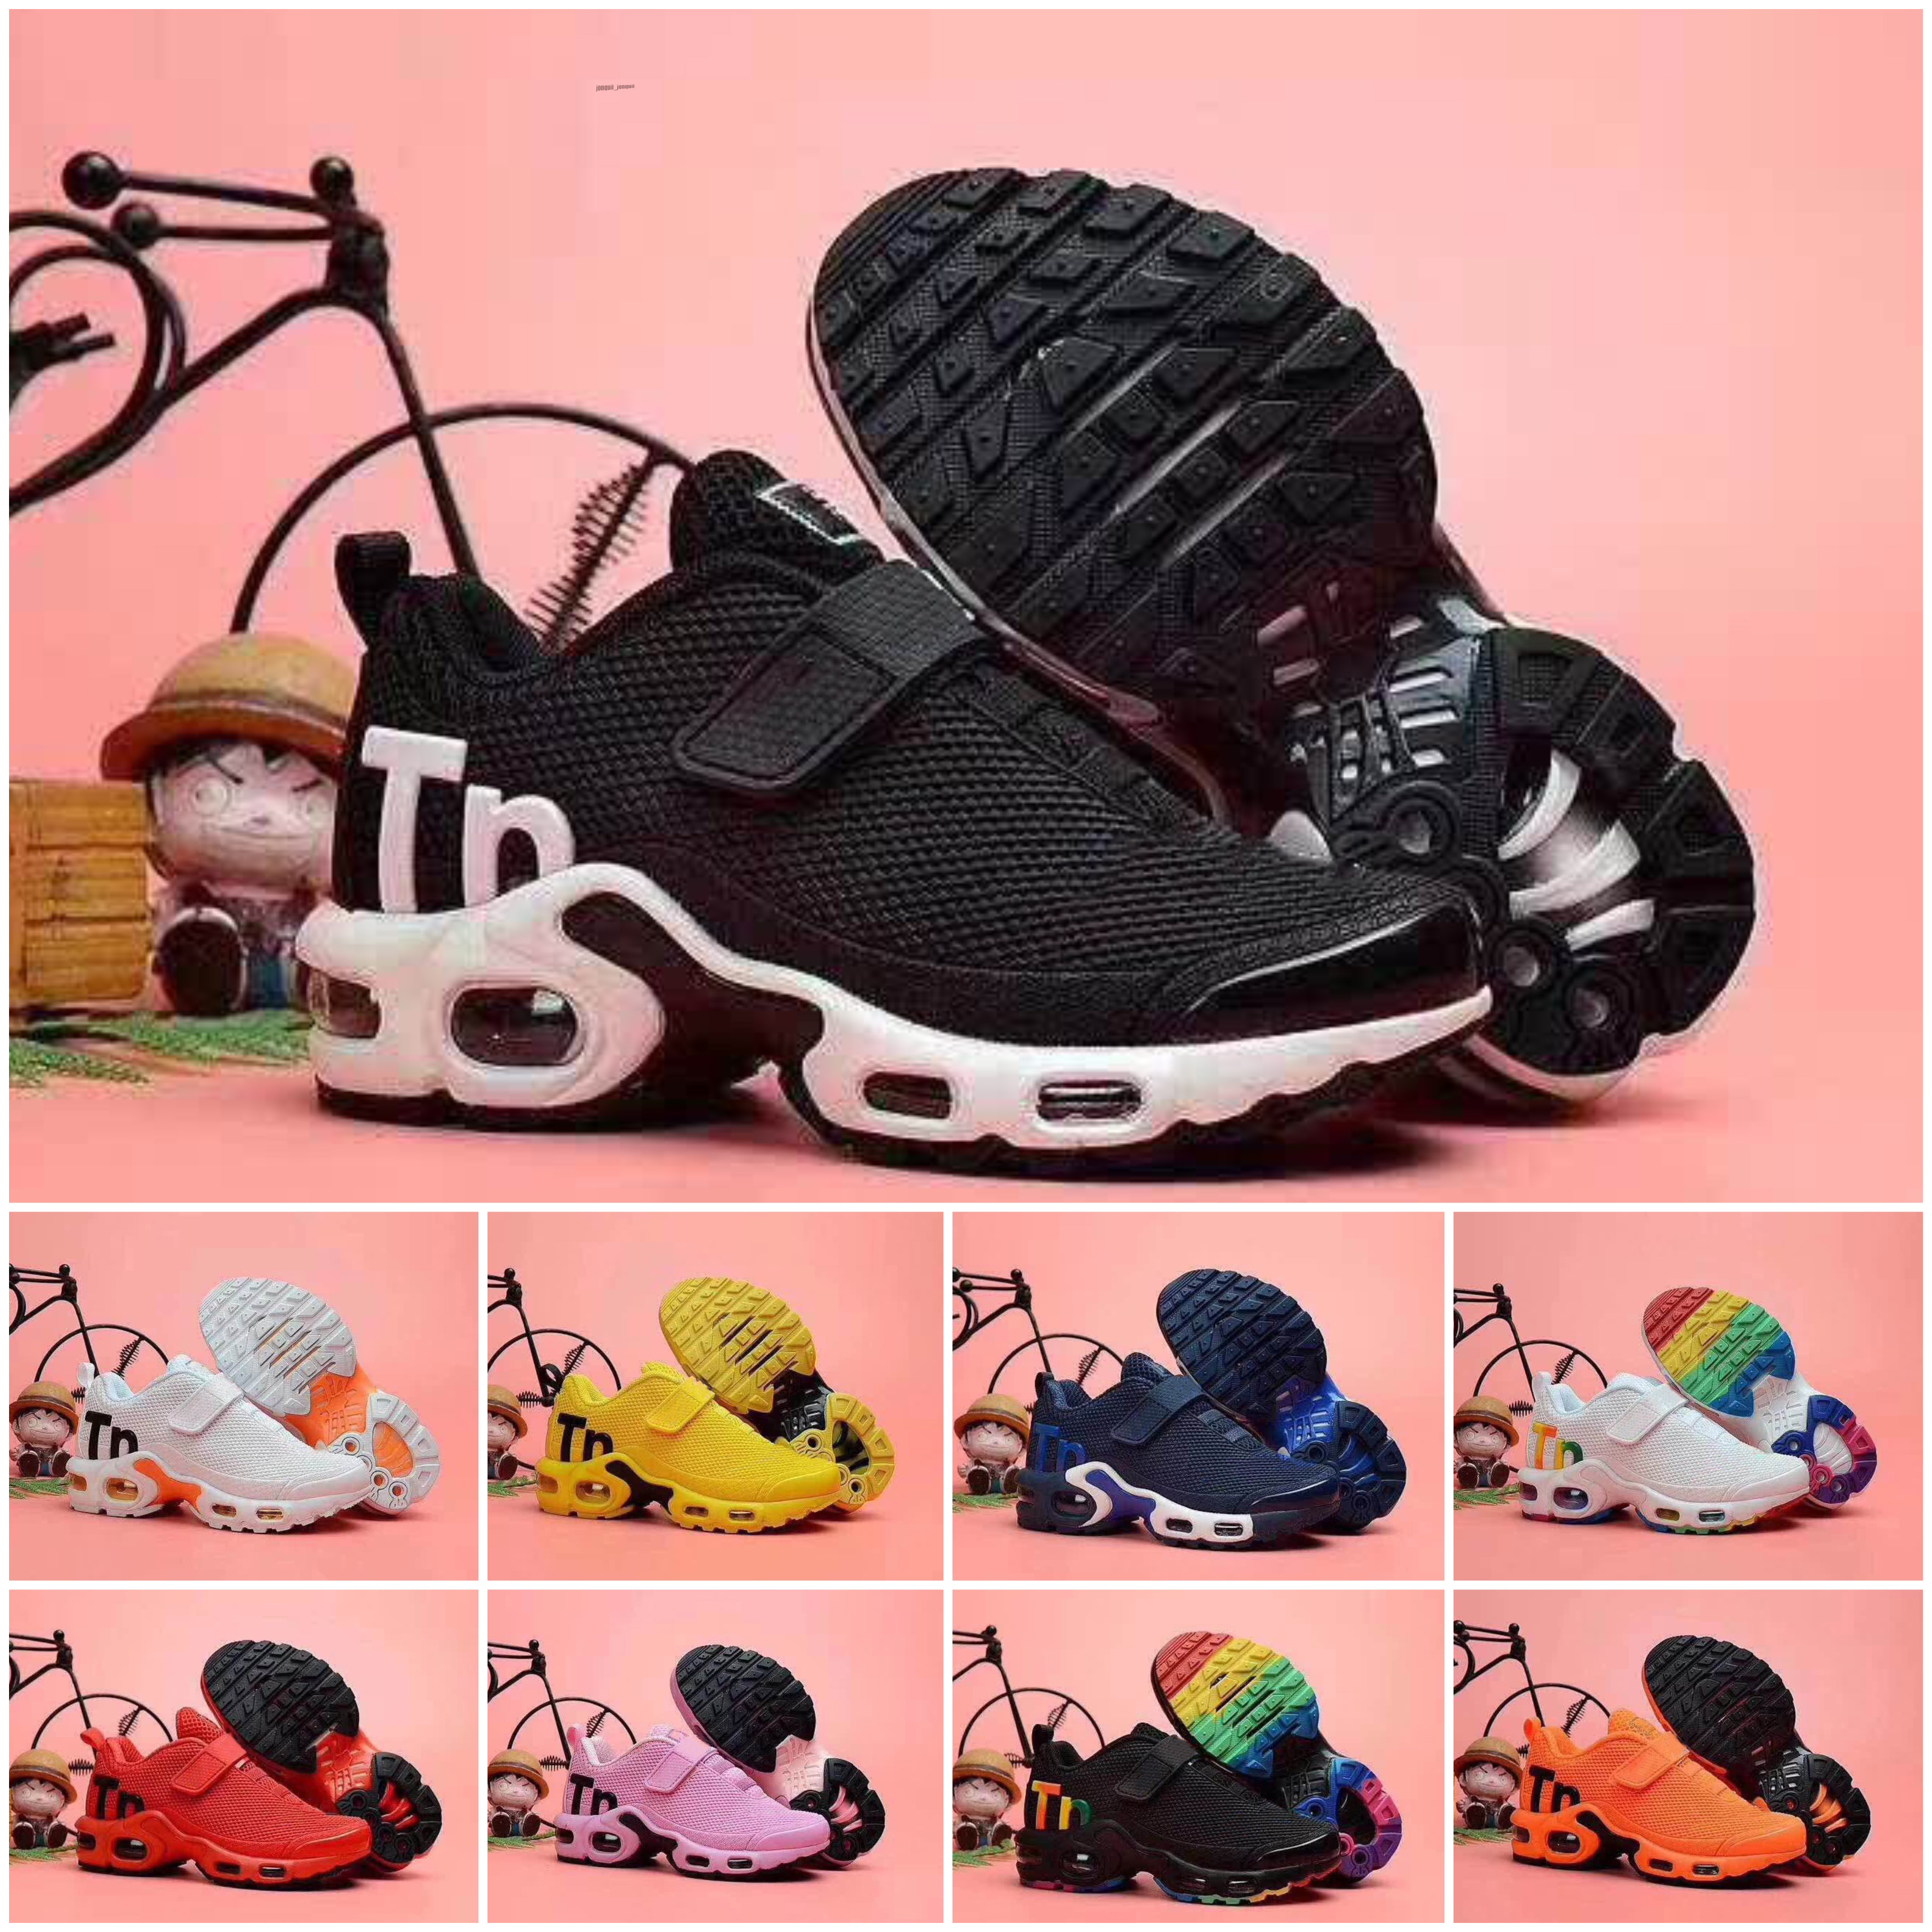 

New Kids Plus Tn Children Parent Casual Shoes For Baby Boy and Girl Fashion Designer Sneakers White Running Outdoor Trainer Shoes, Color 5